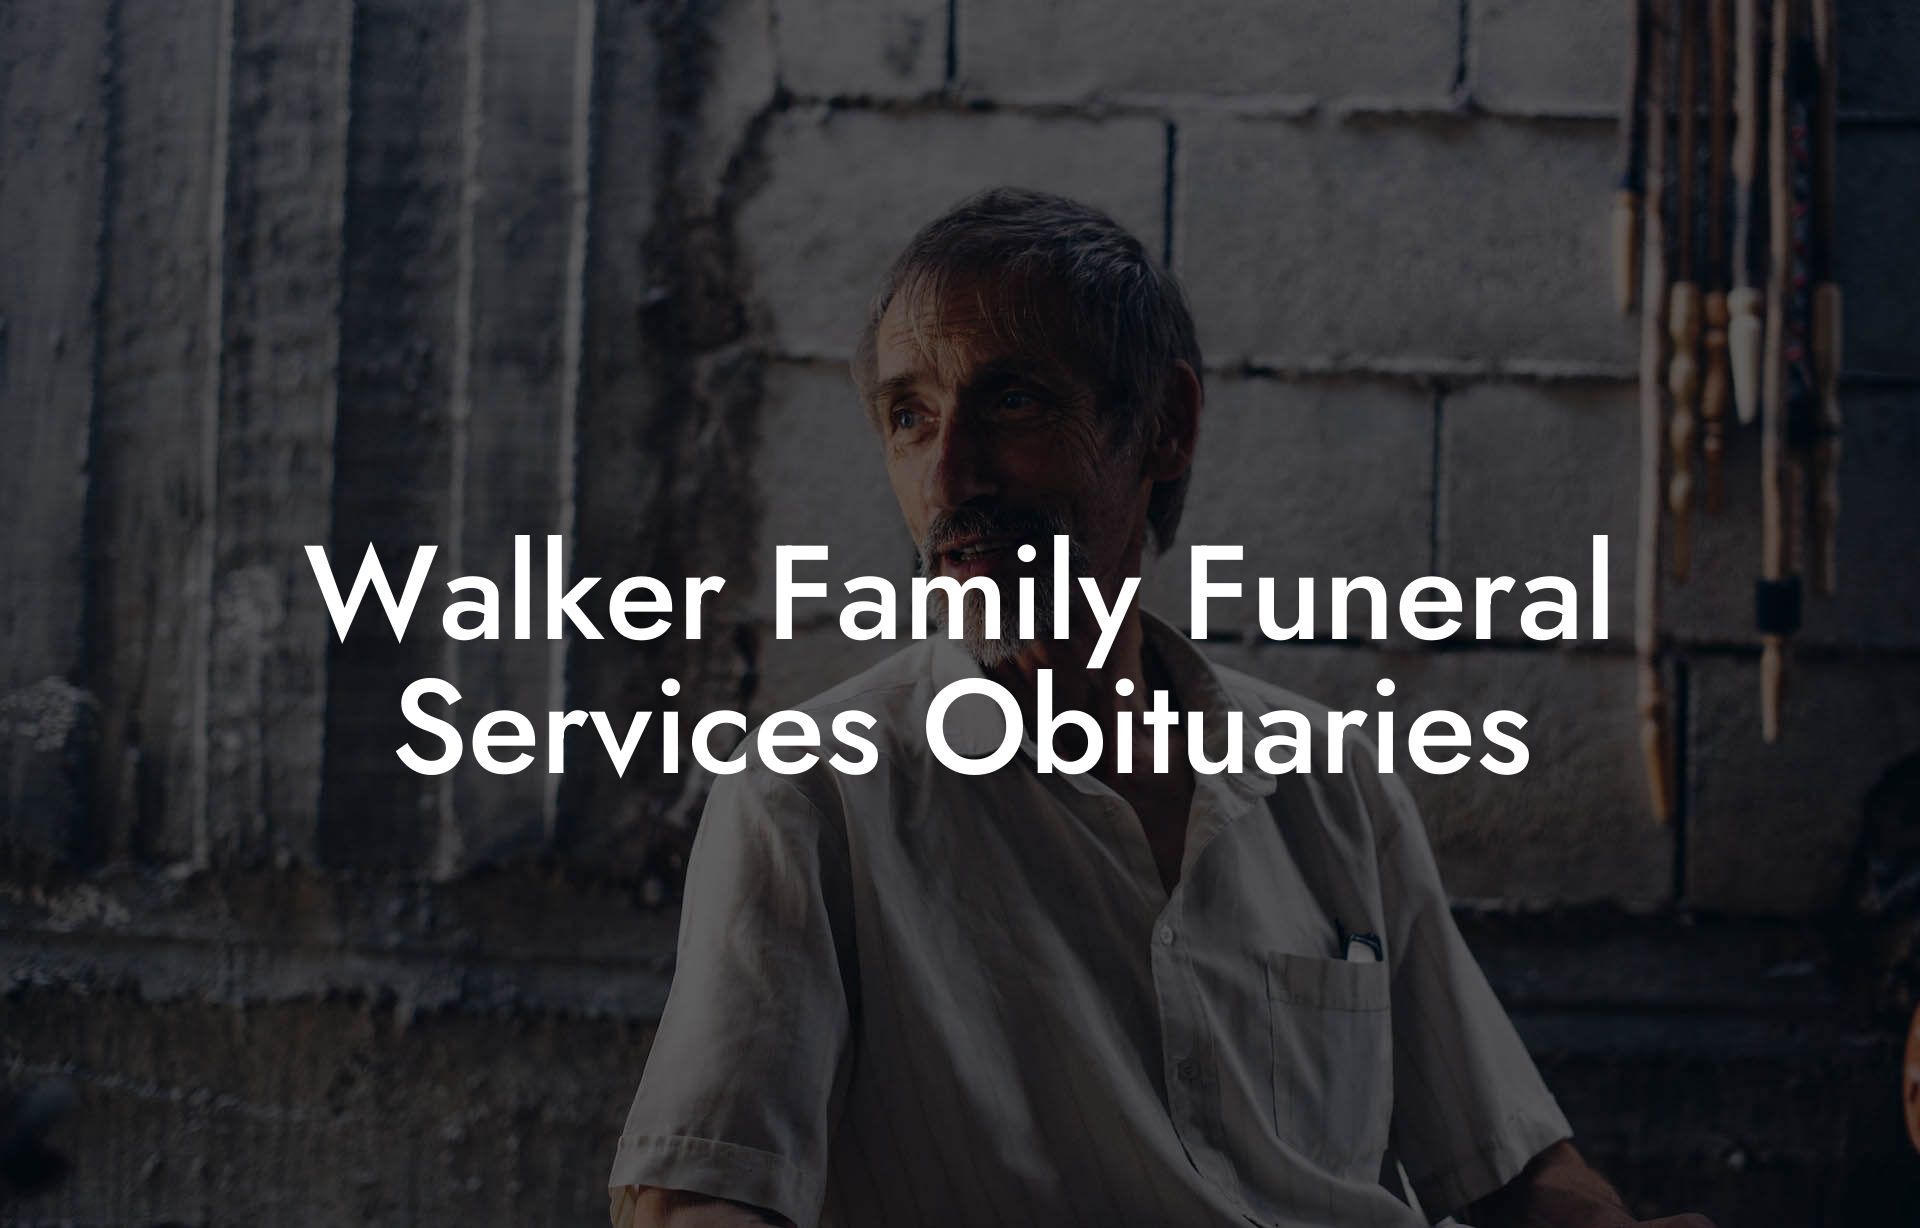 Walker Family Funeral Services Obituaries